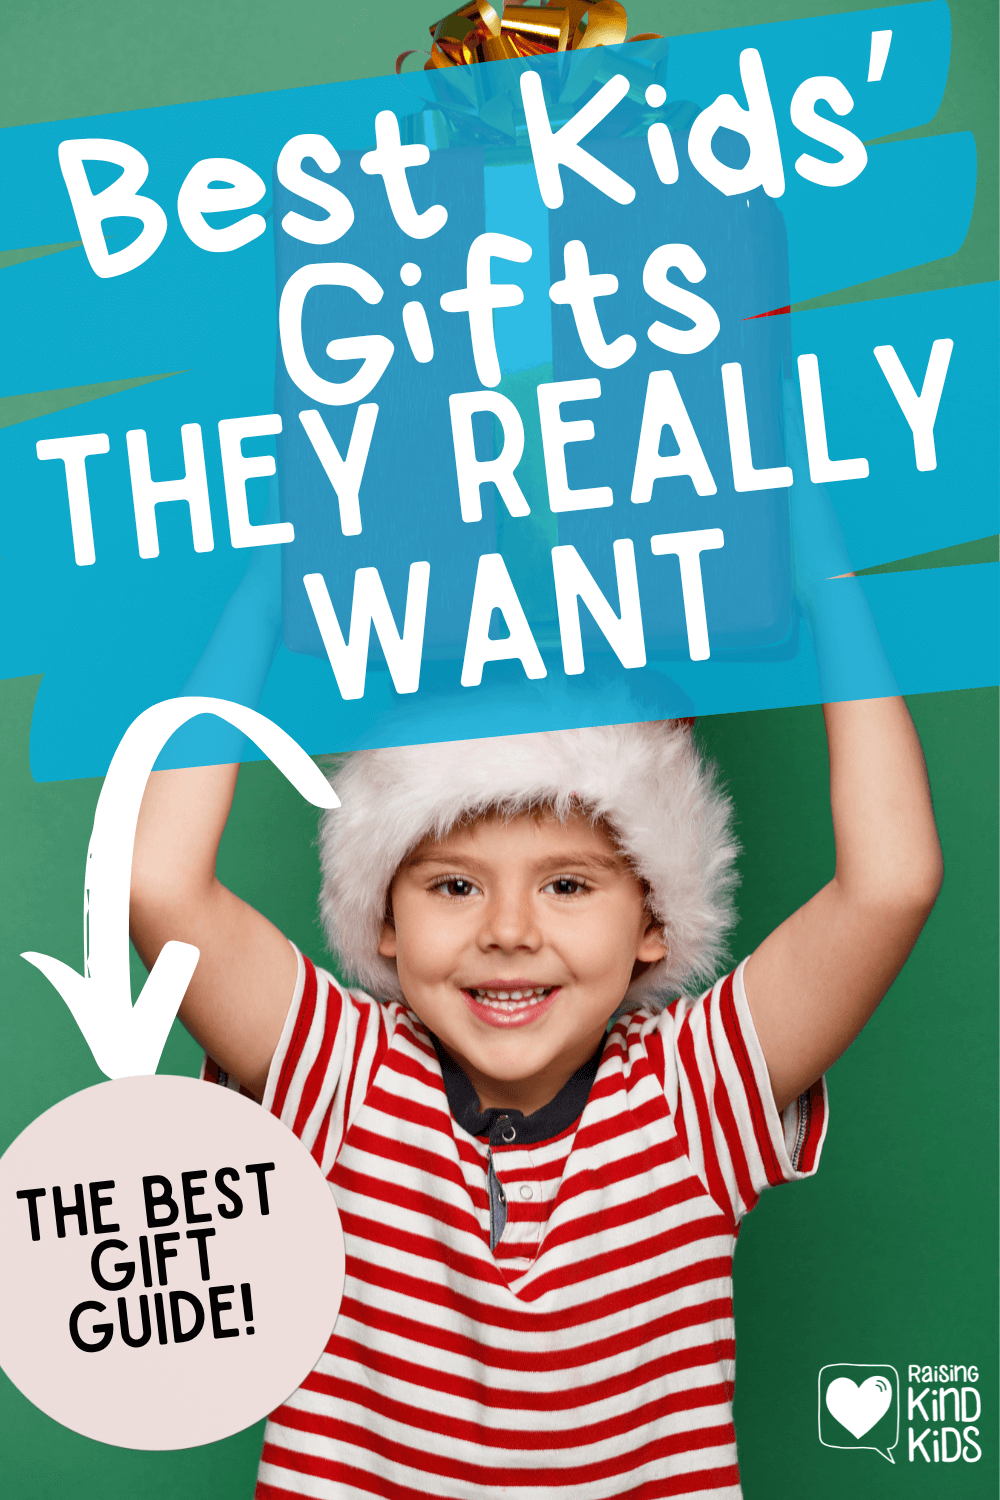 Need awesome kid gift ideas? This ultimate list has hundreds of the best kid gift ideas you will need. www.coffeeandcarpool.com #holidaygiftideas #holidaygifts #kidsgiftideas #bestkidsgifts